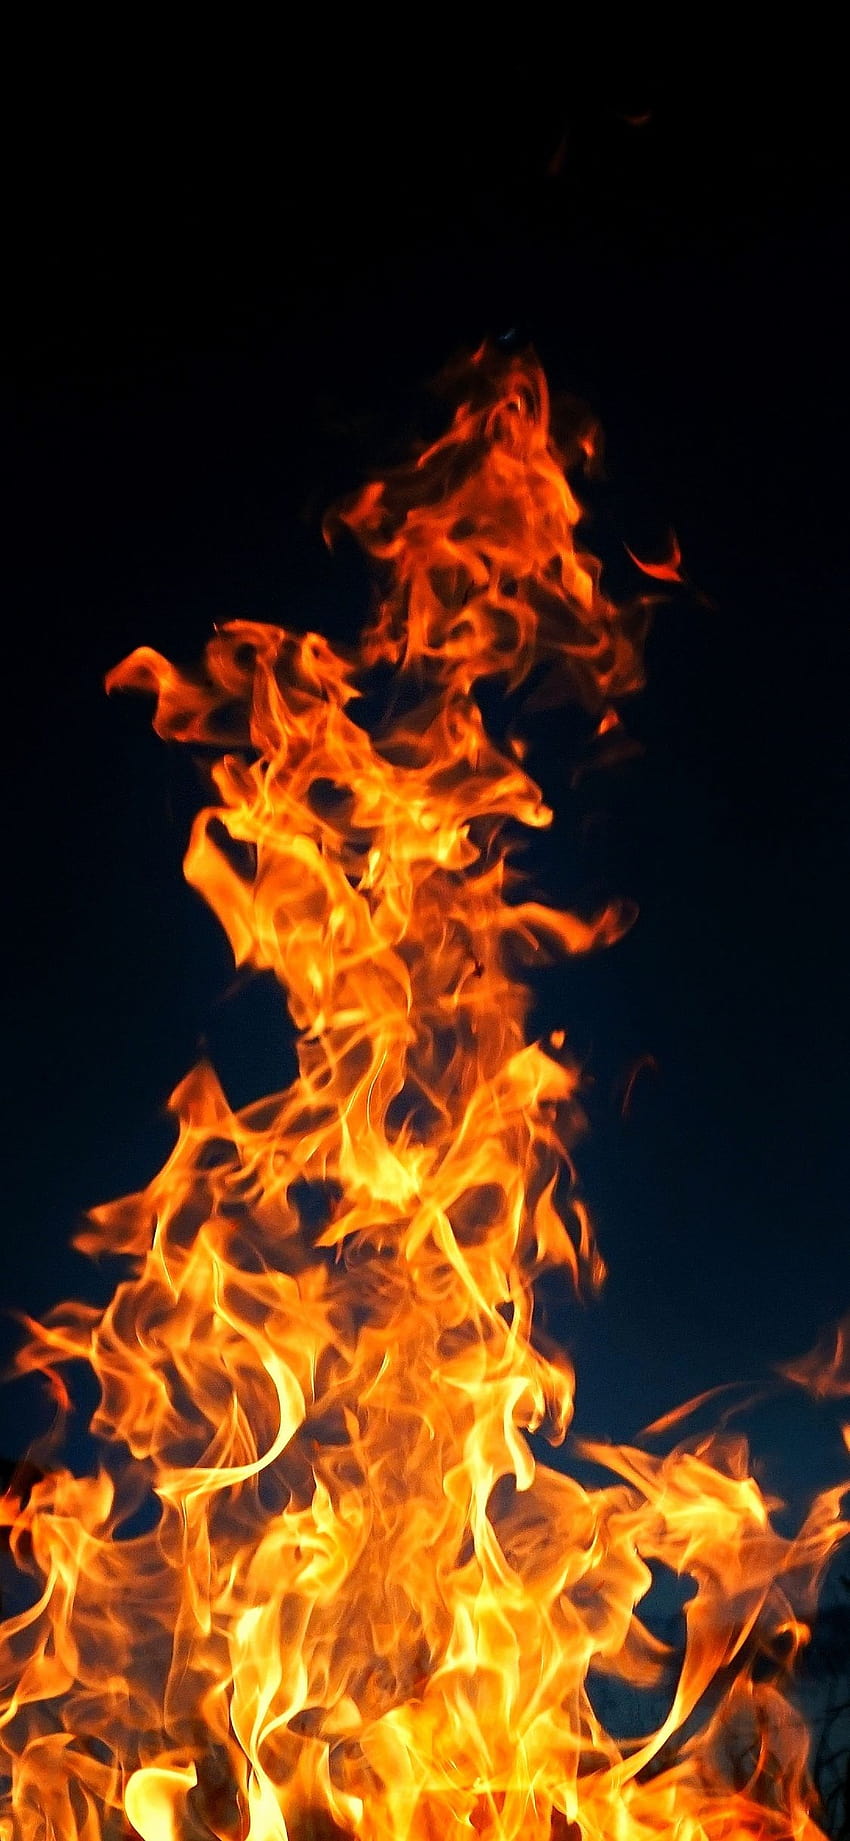 A close up of a fire with a black background - Fire